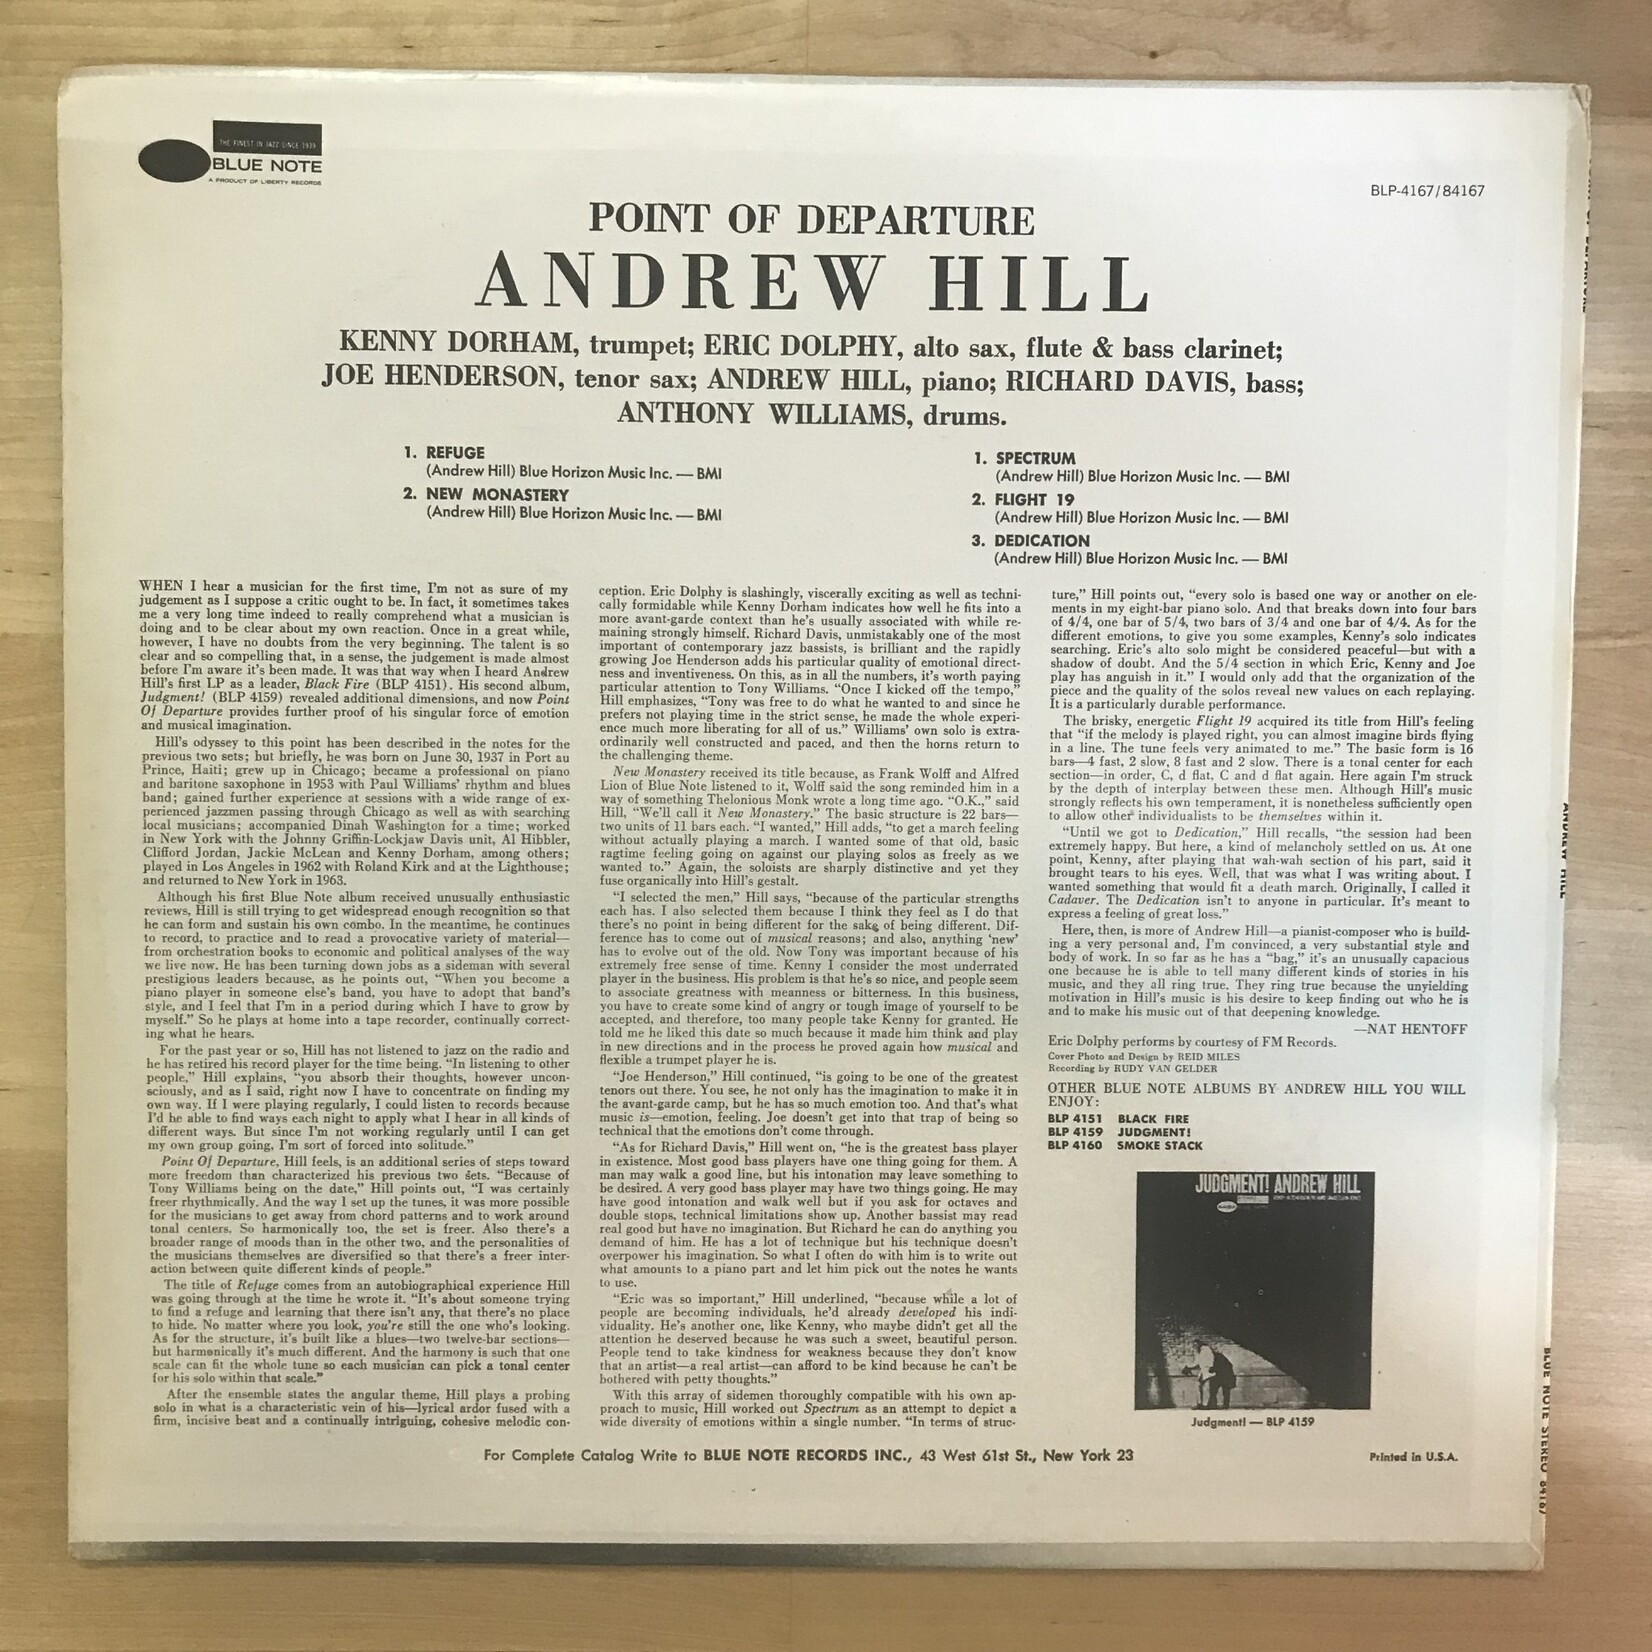 Andrew Hill - Point Of Departure - BST 84167 - Vinyl LP (USED)